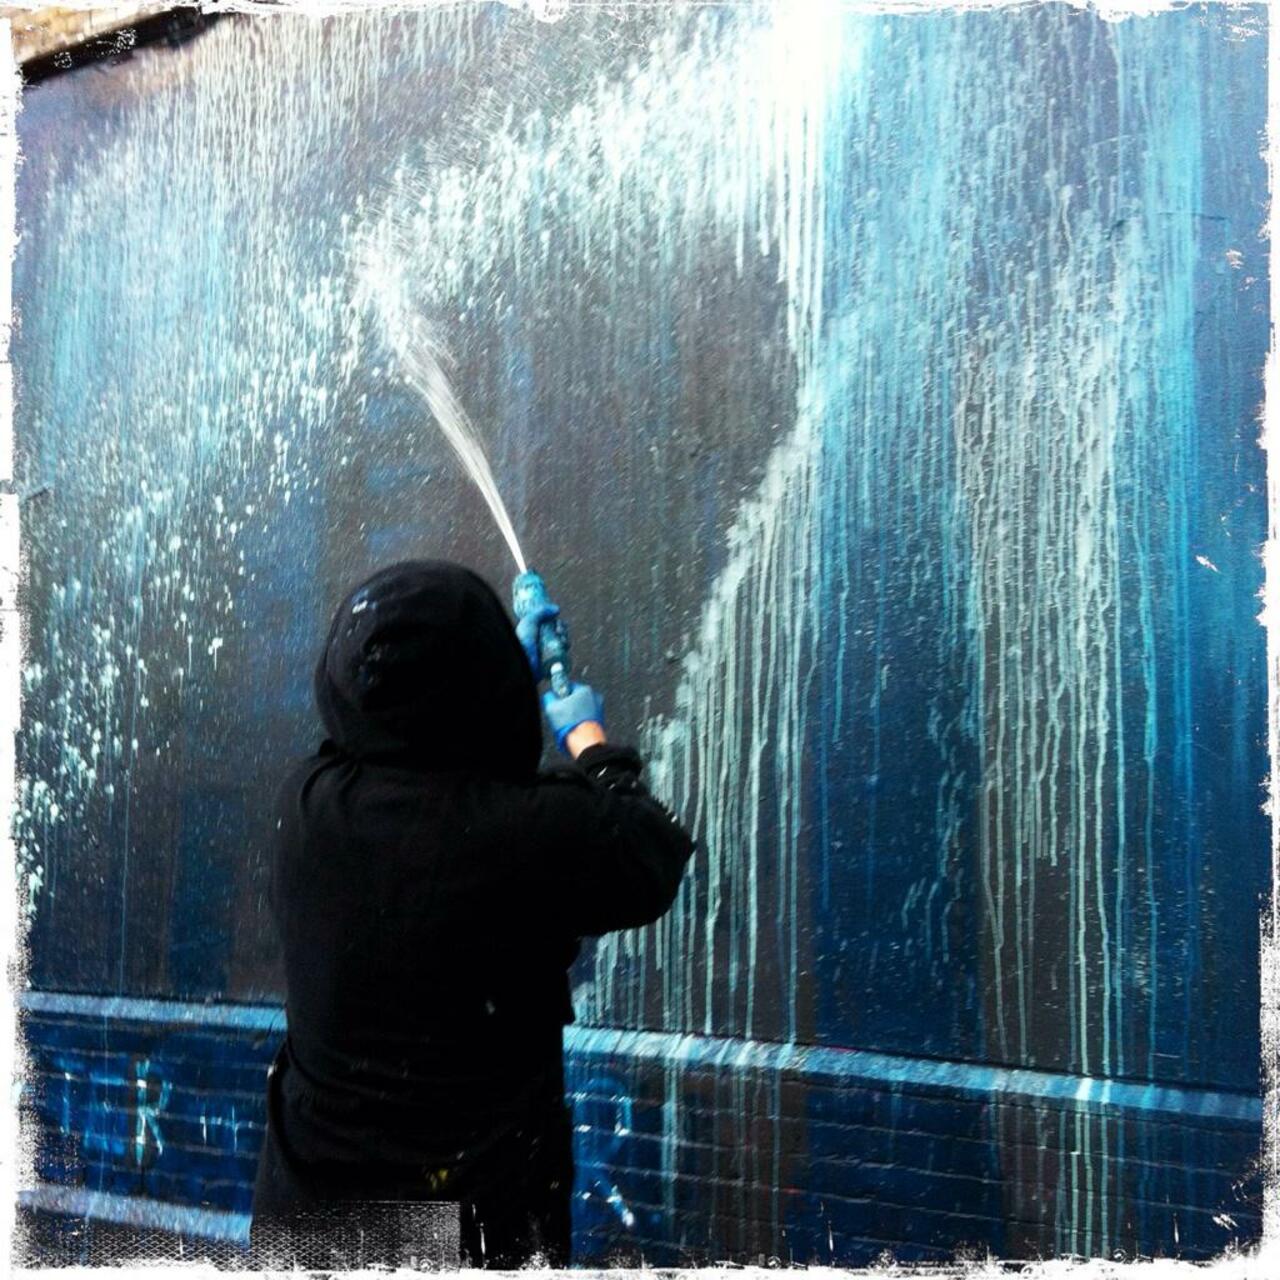 RT @BrickLaneArt: Getting messy - @HIMBAD_ at the Shoreditch Art Wall #art #streetart #graffiti http://t.co/HfhwwYR27Y